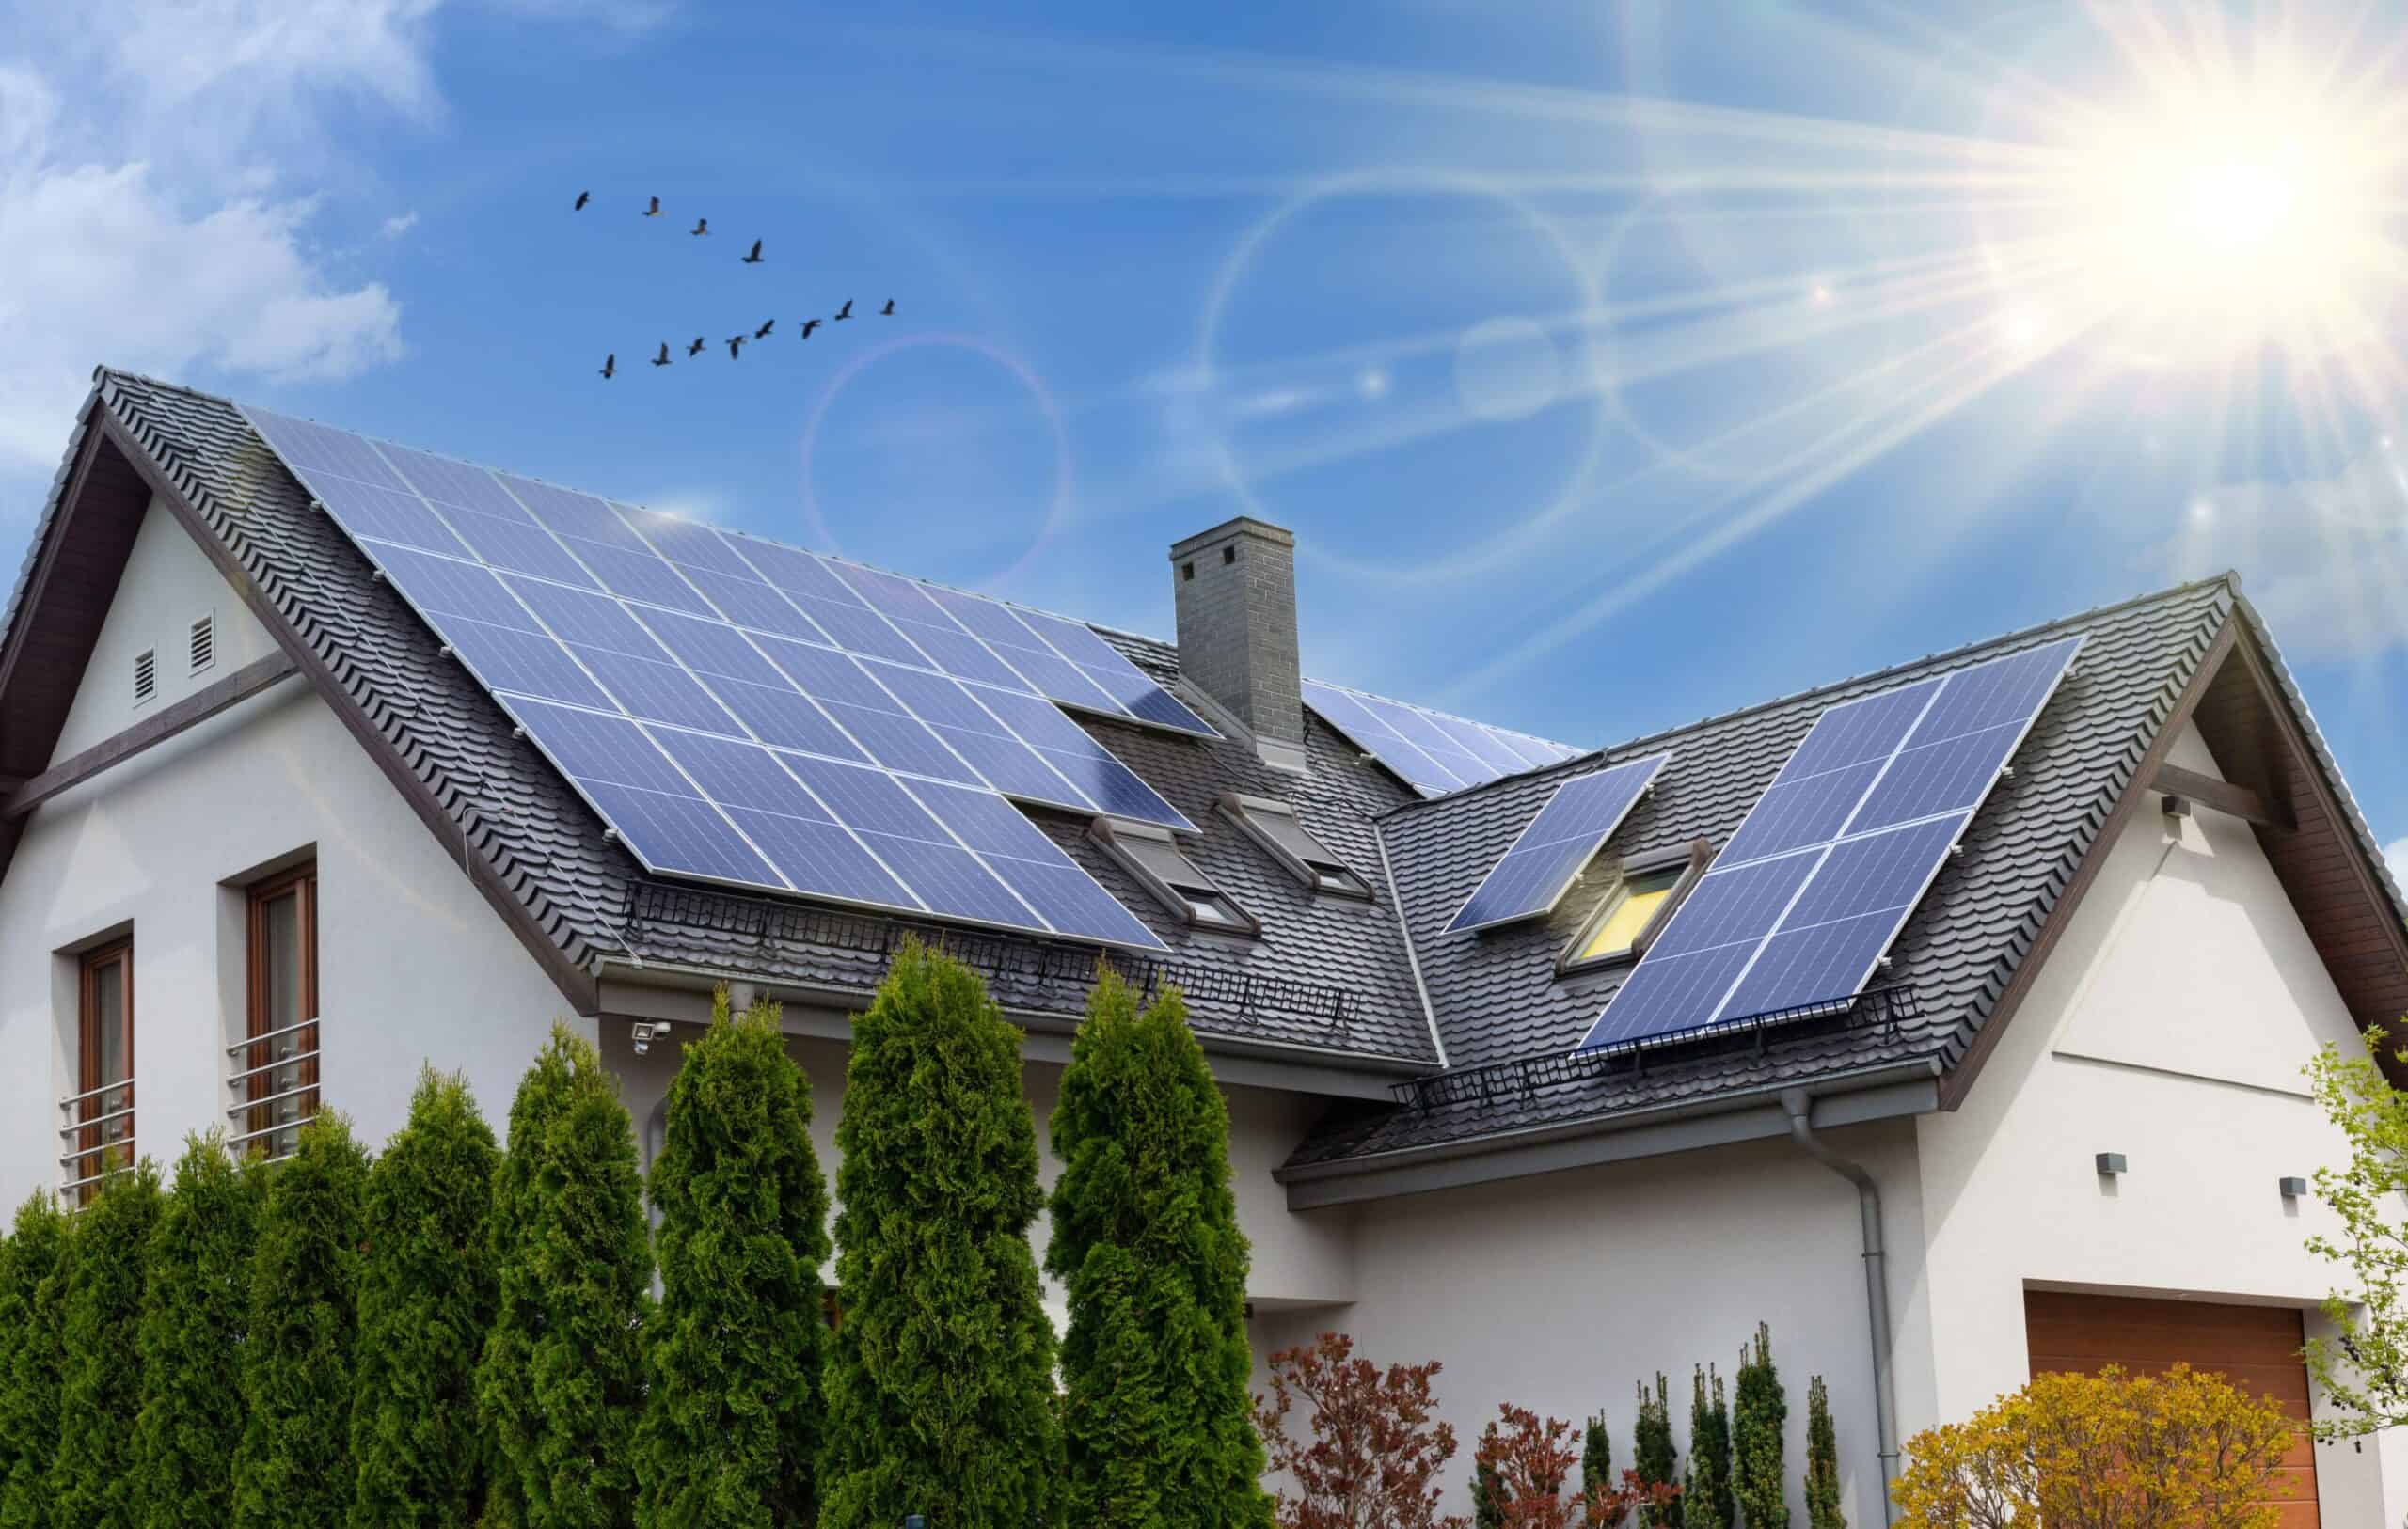 Residential Solar Panels Frequently Asked Questions